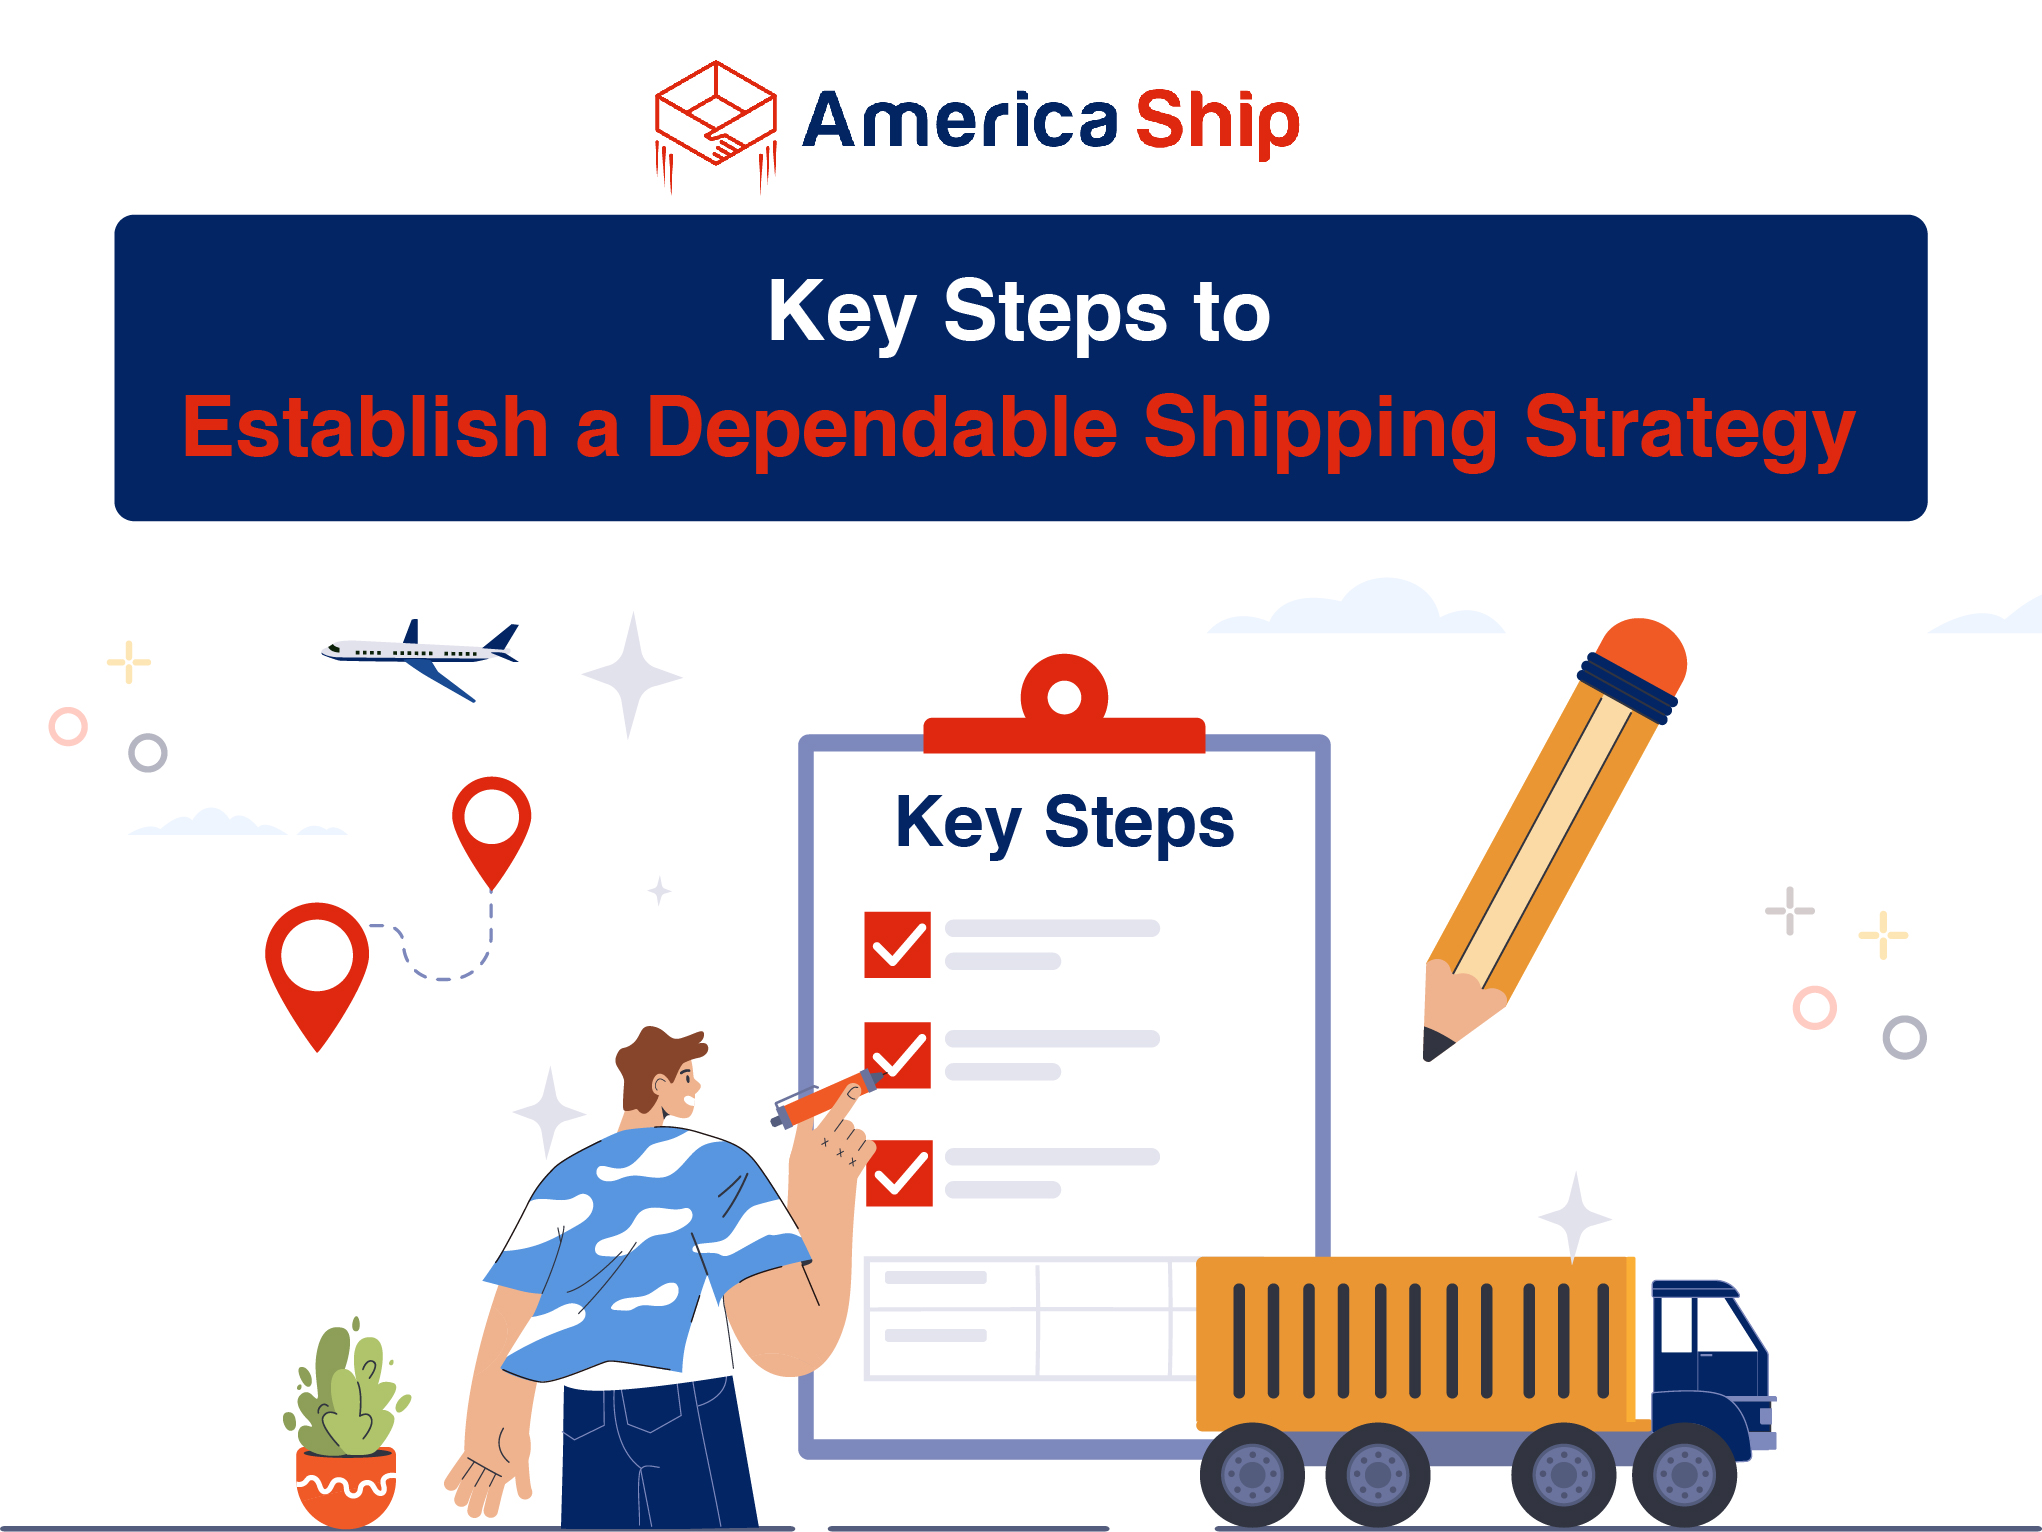 Key Steps to Establish a Dependable Shipping Strategy